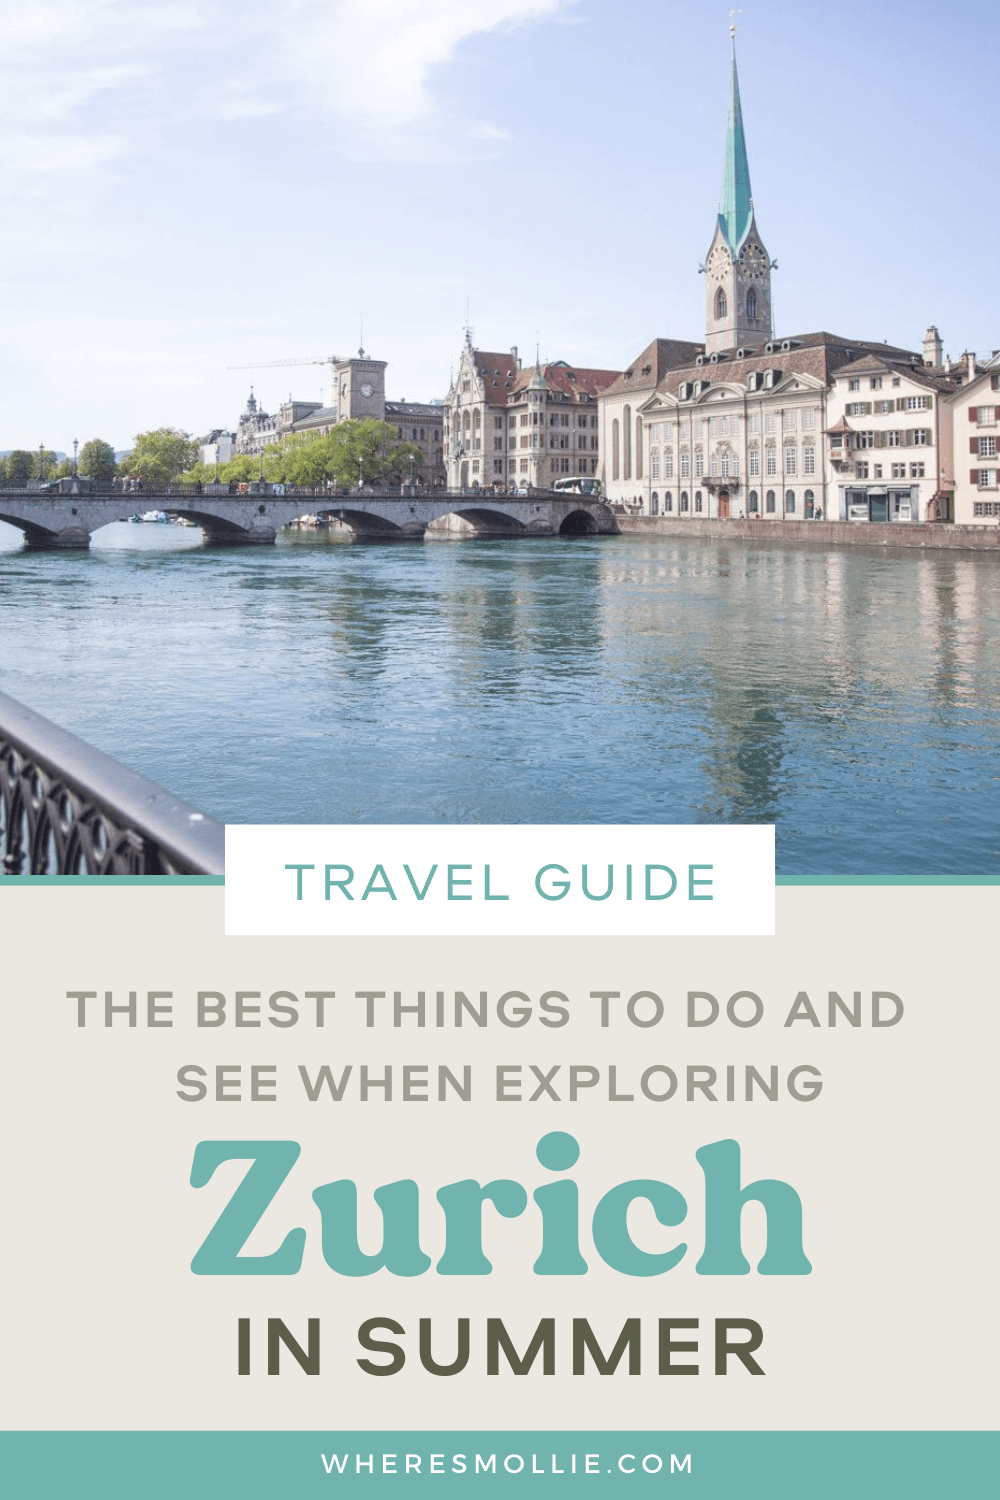 How to spend 3 days in Zurich during the summer